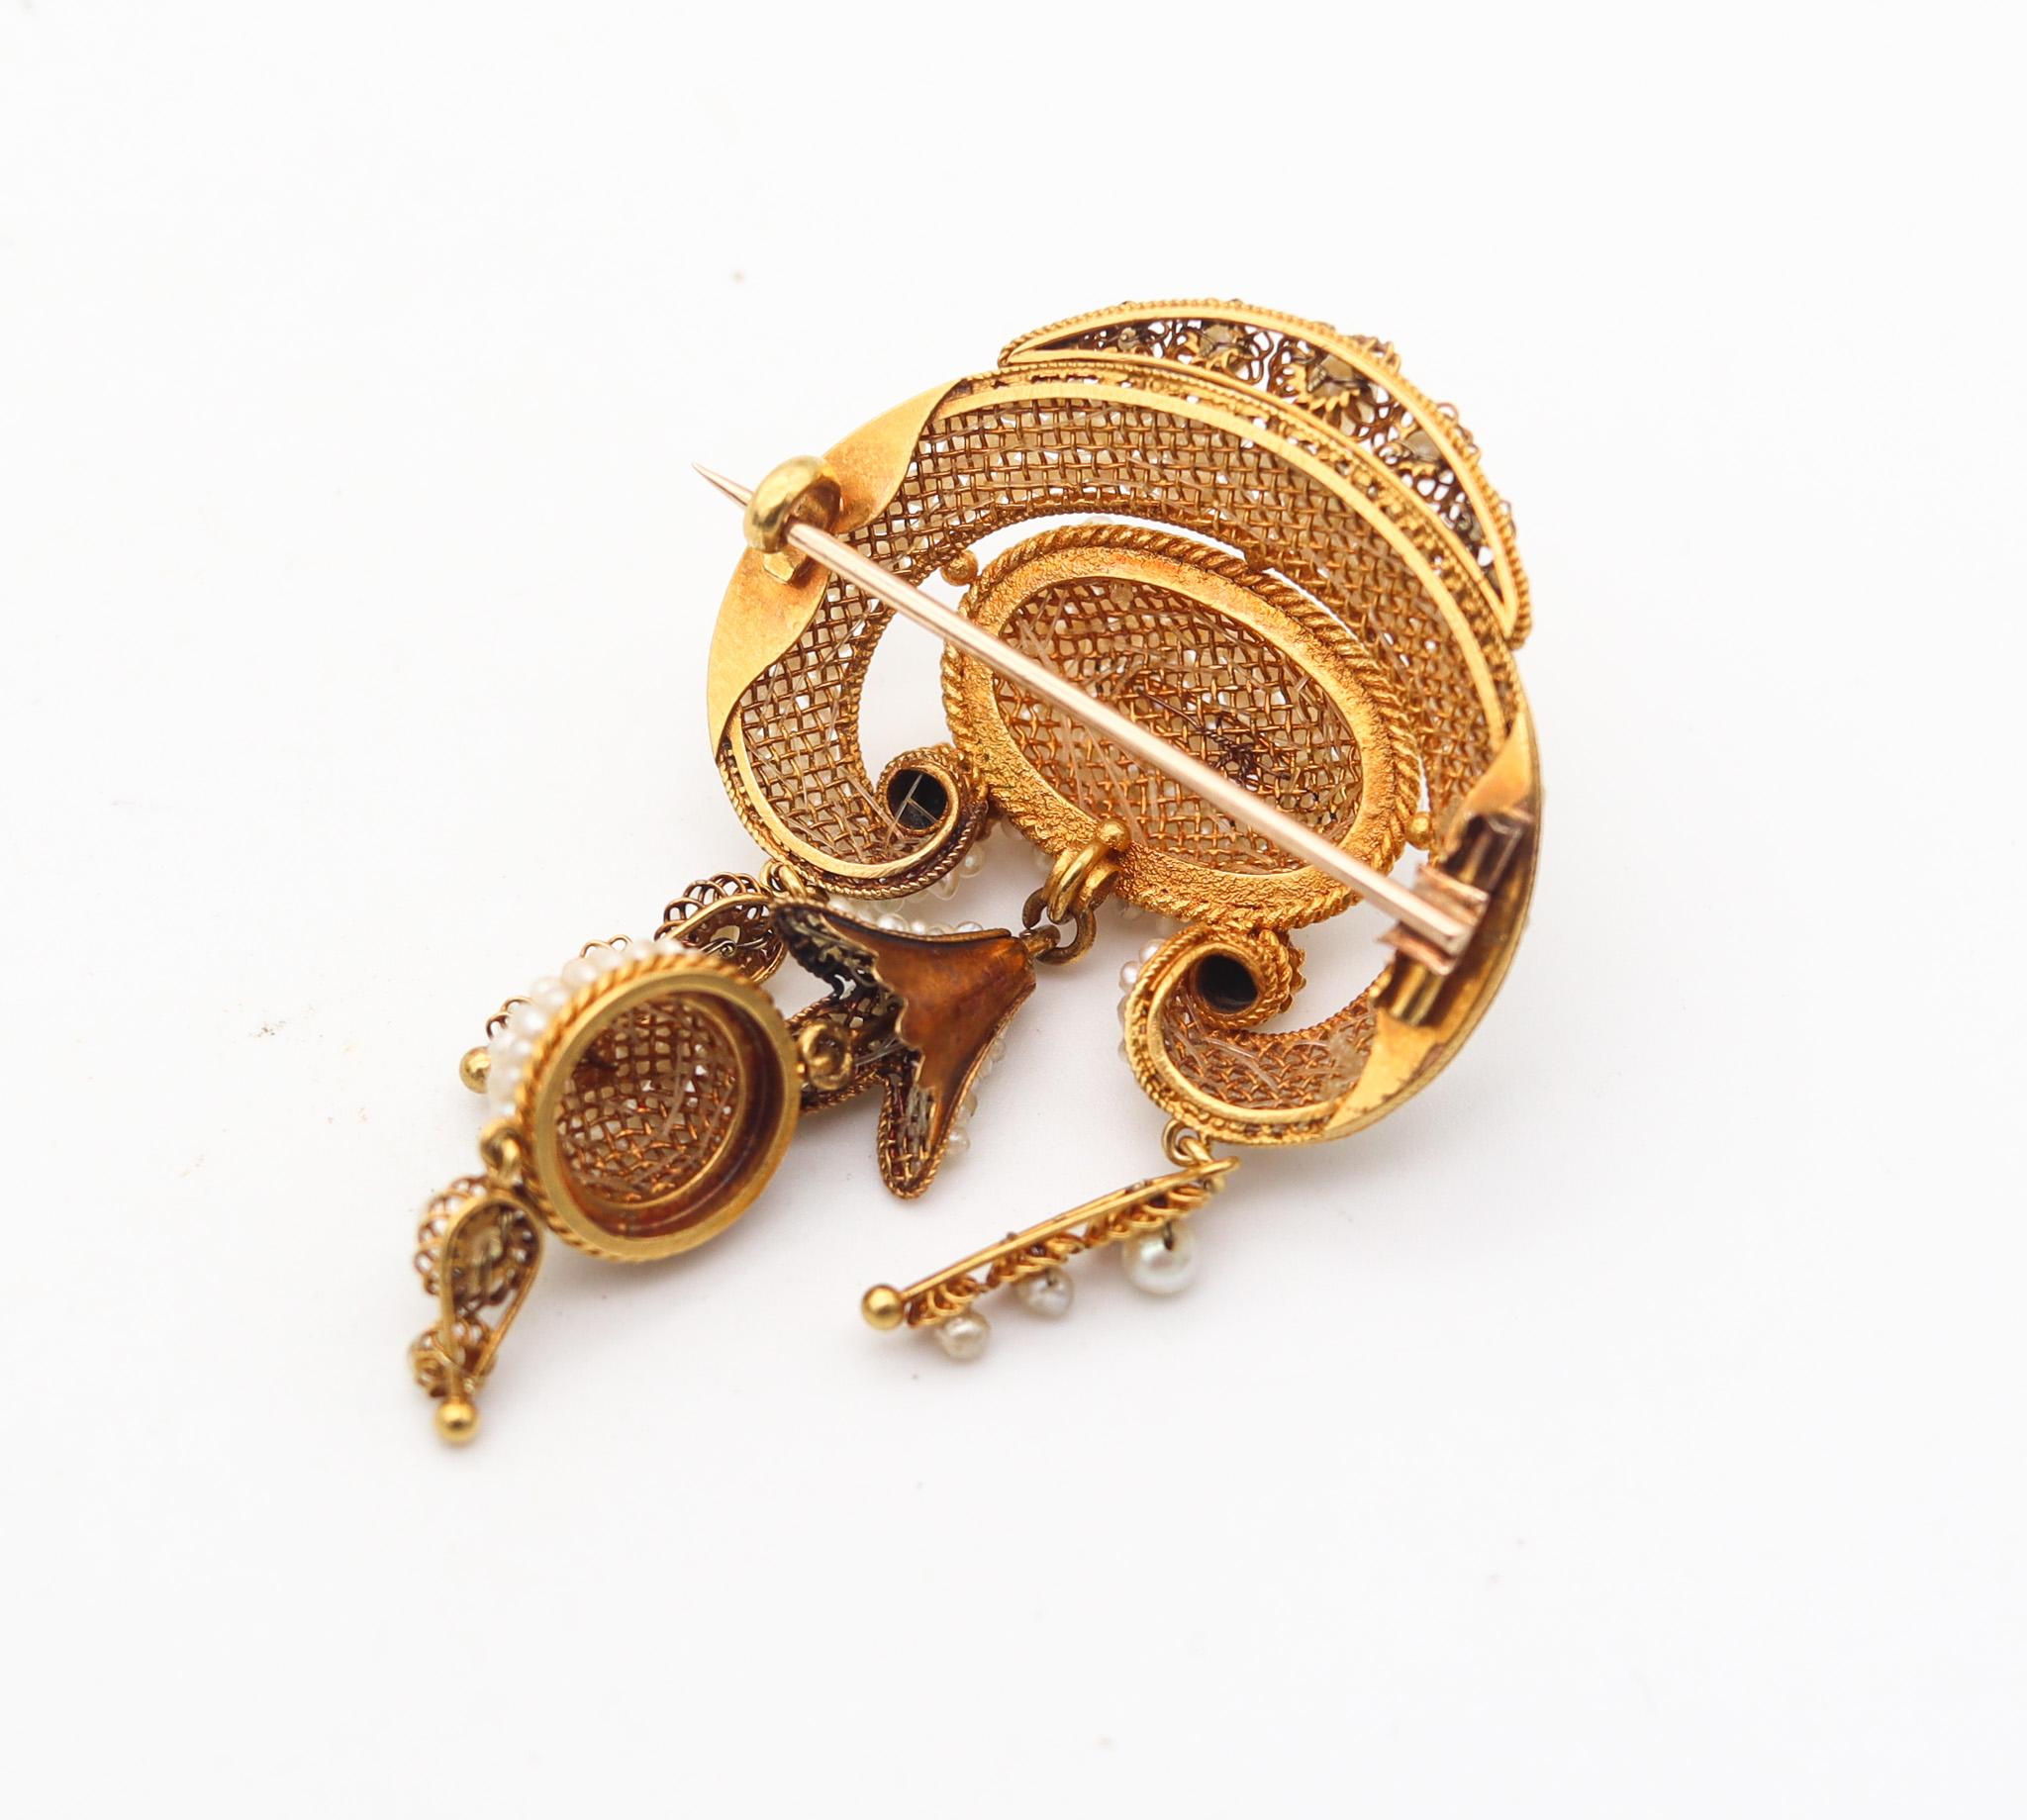 Round Cut Portuguese Iberian 1850 Filigree Brooch In 21Kt Yellow Gold With Seed Pearls For Sale